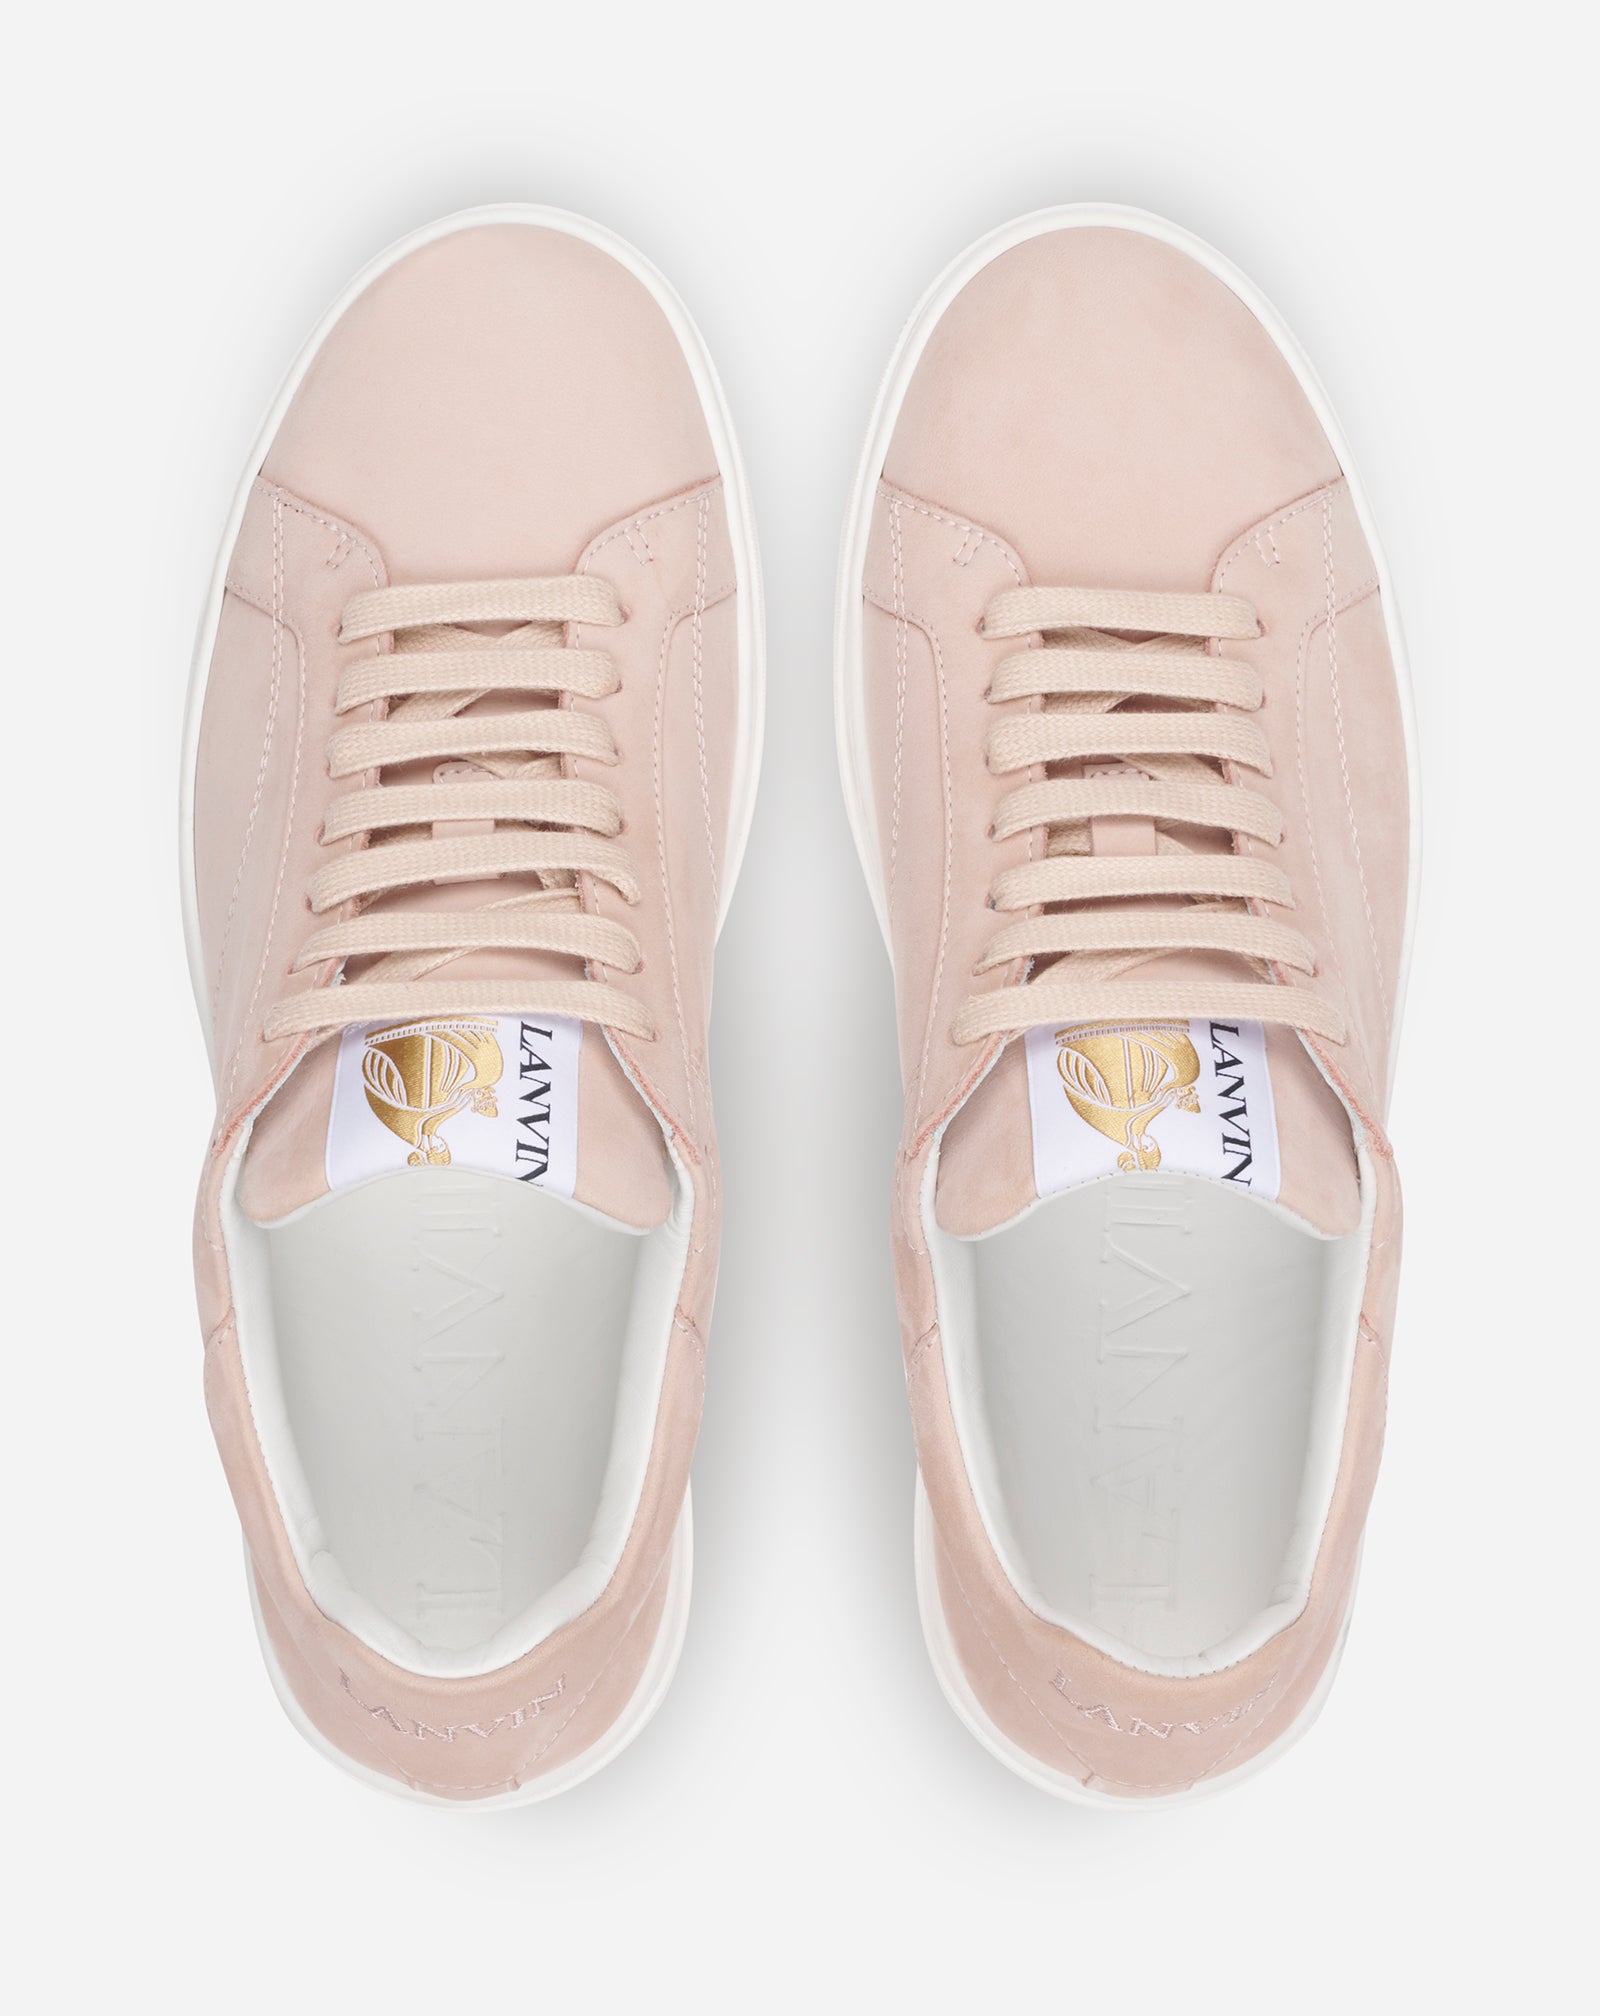 SNEAKERS PINK | SUEDE BLOSSOM – LANVIN DDB0 Lanvin